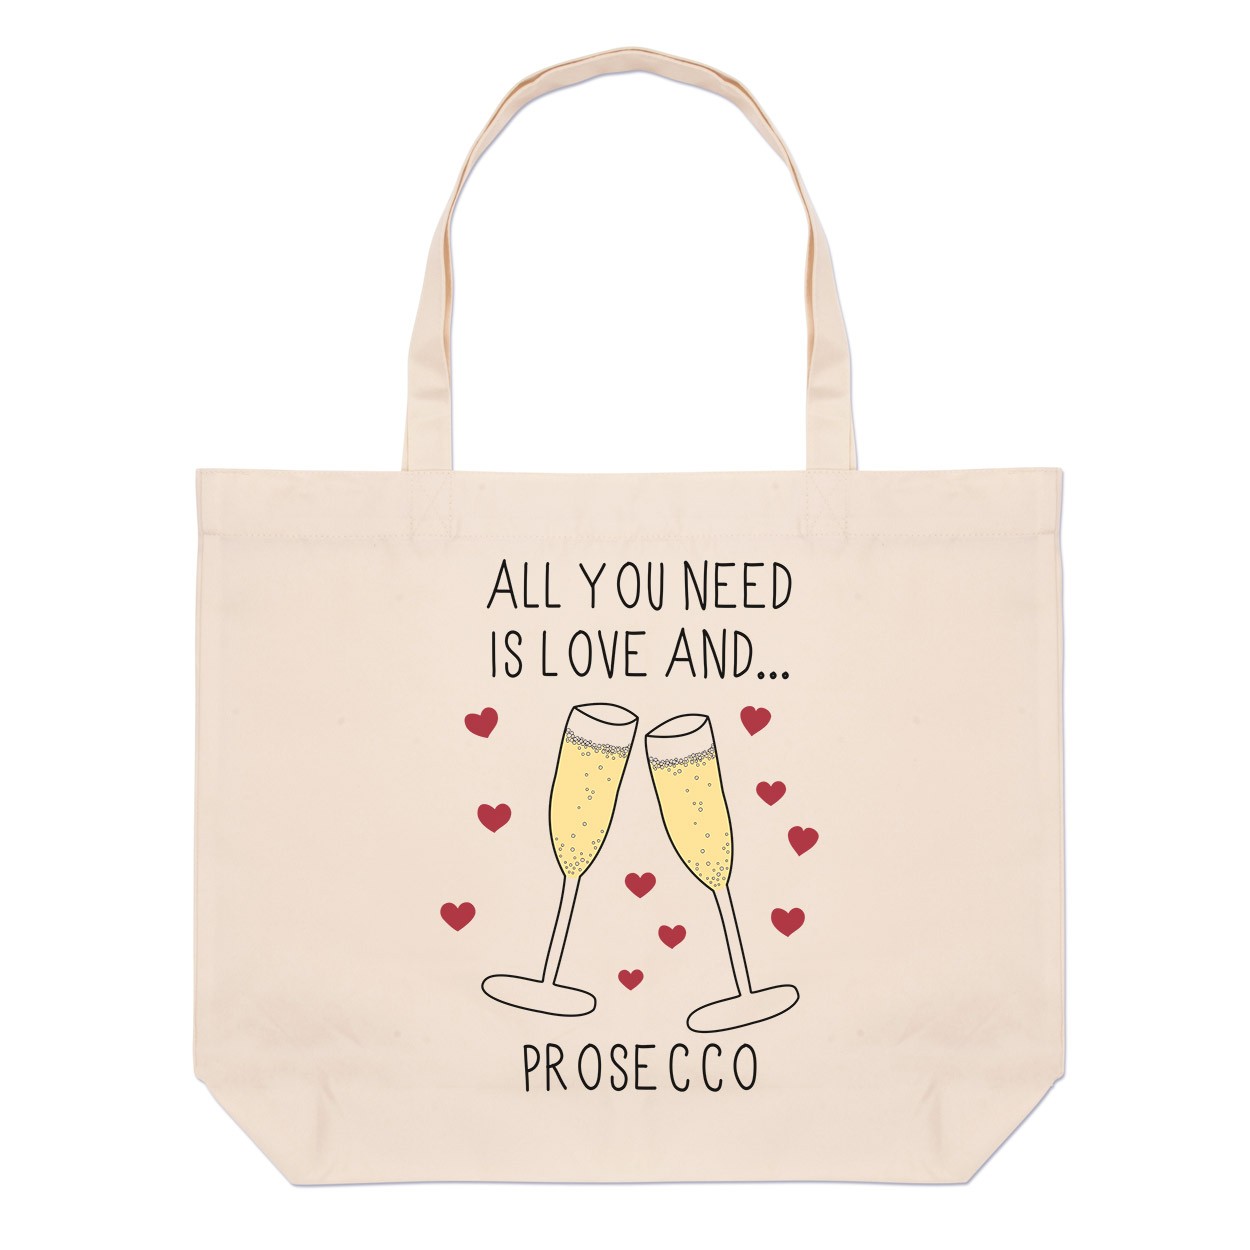 All You Need Is Love And Prosecco Large Beach Tote Bag